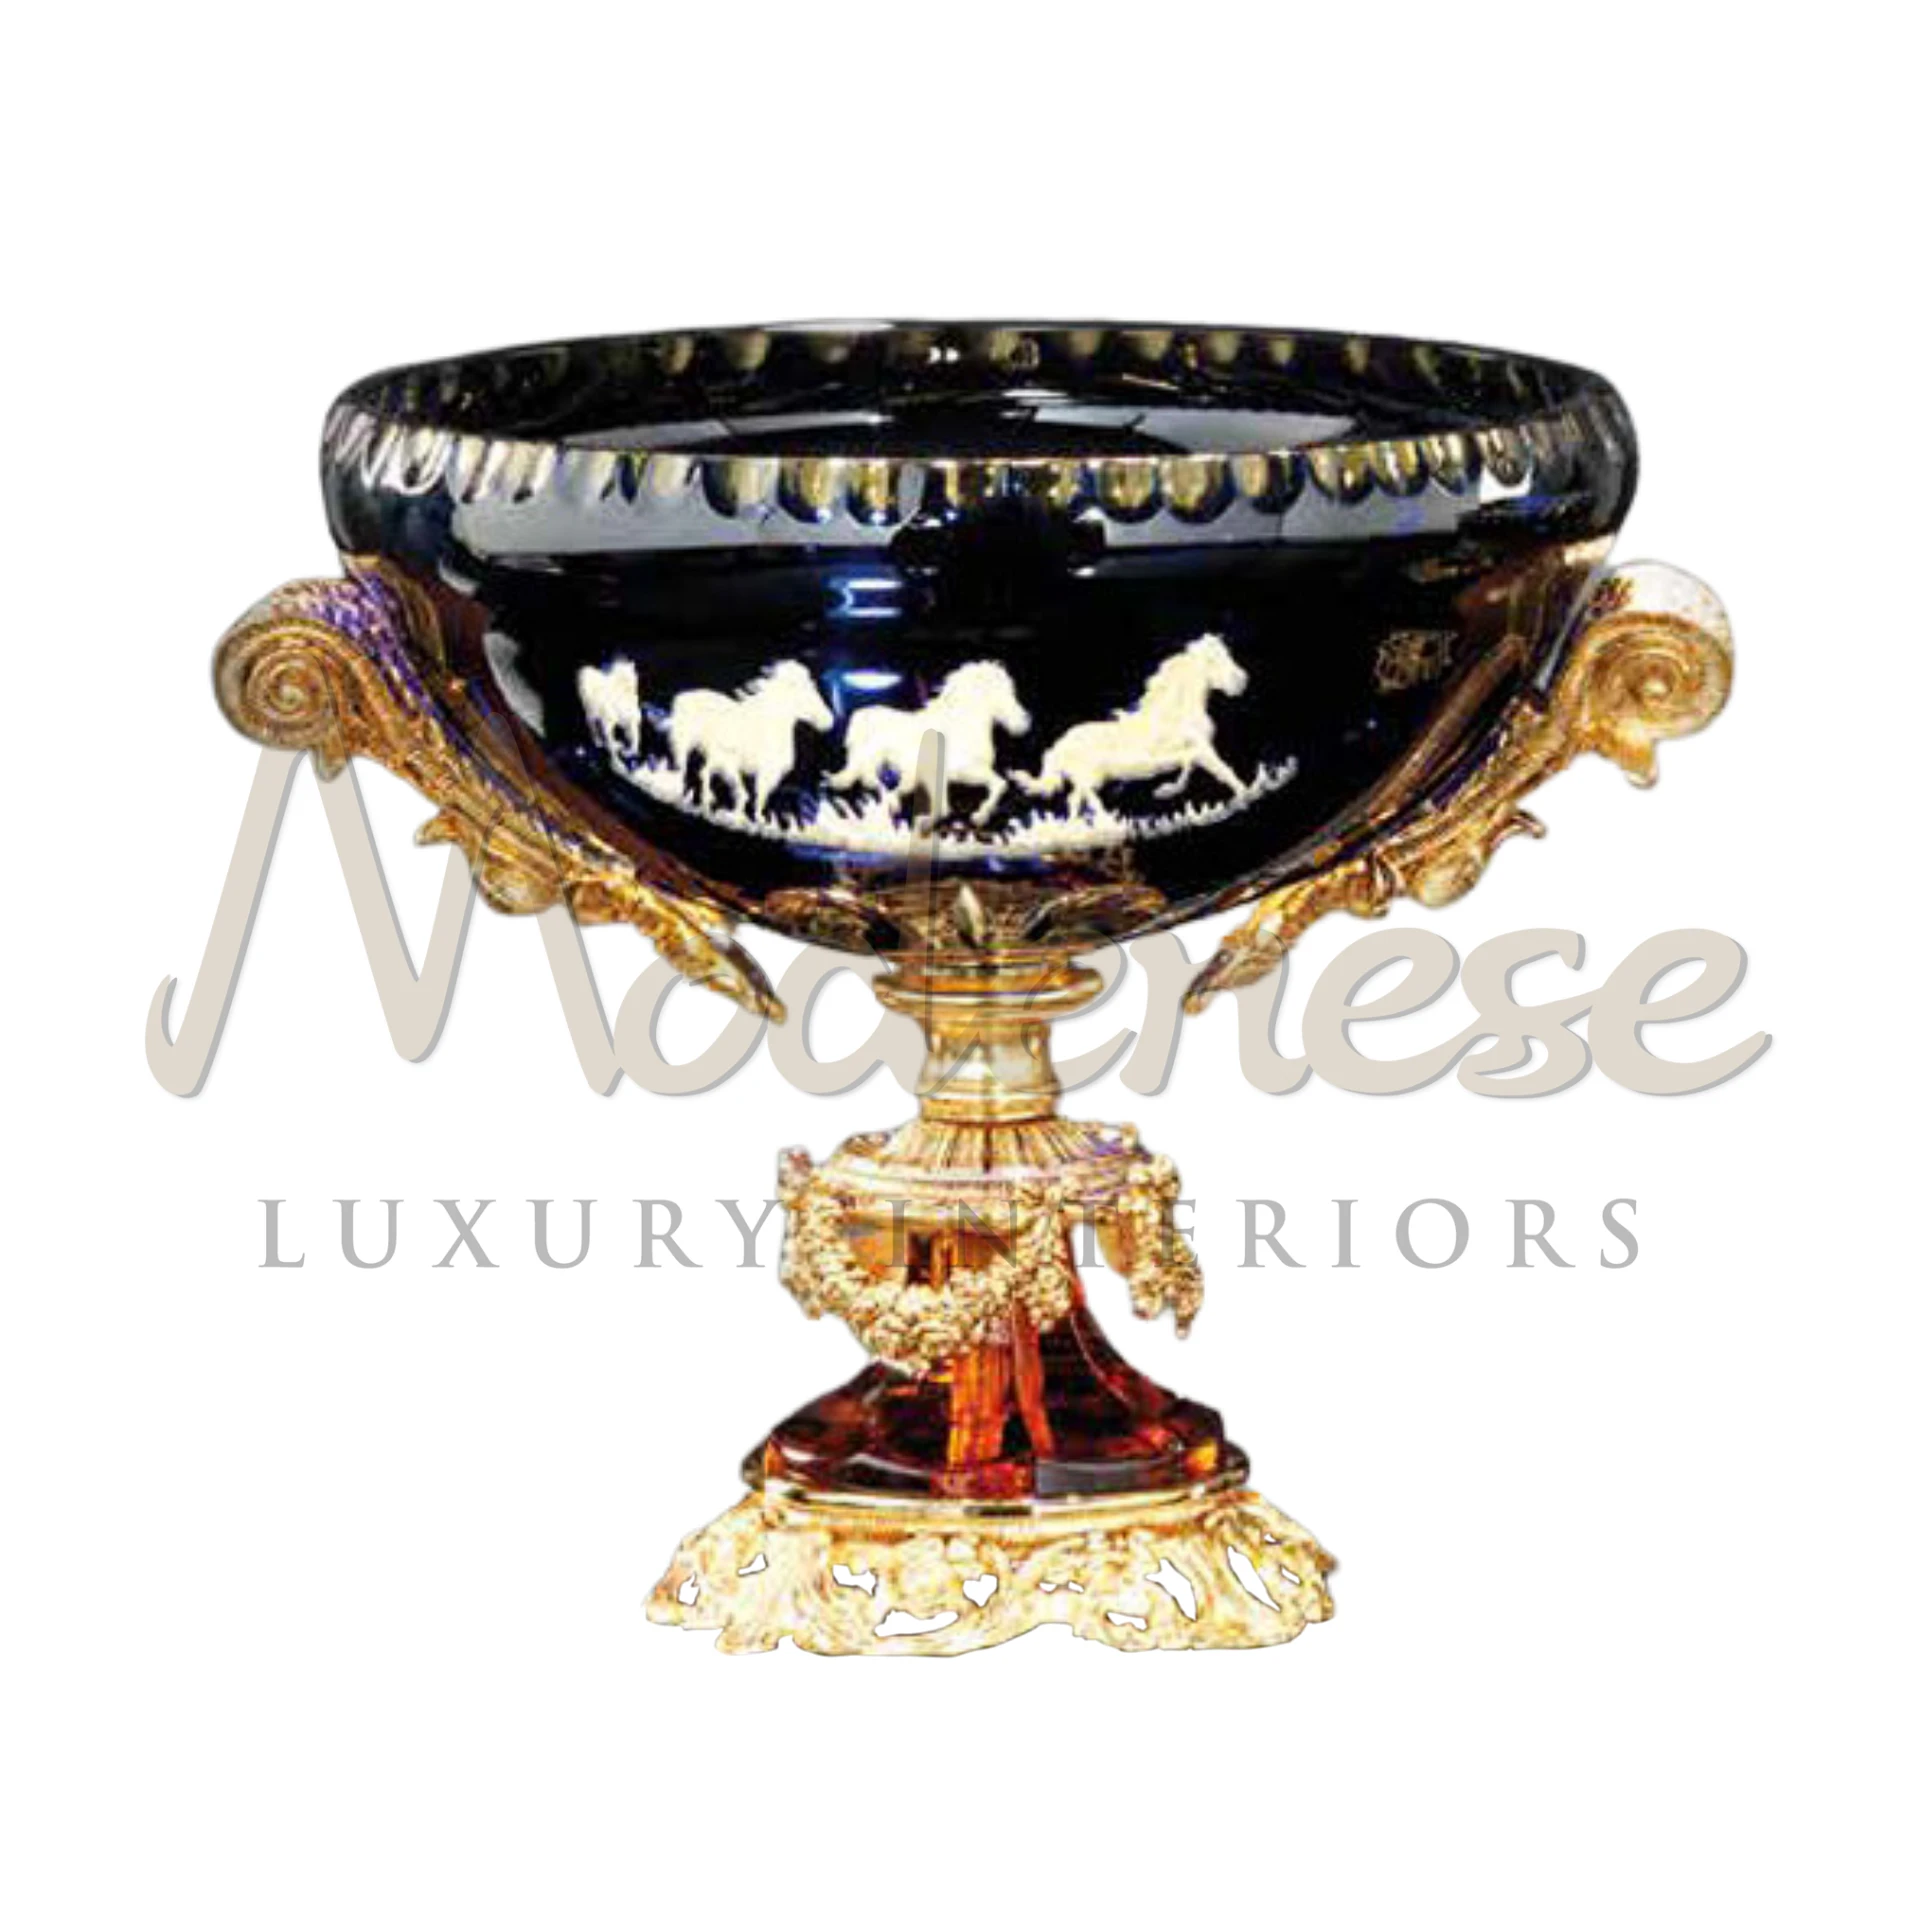 Traditional tall dark glass bowl in classic style, a sophisticated luxury vase for elegant interiors.